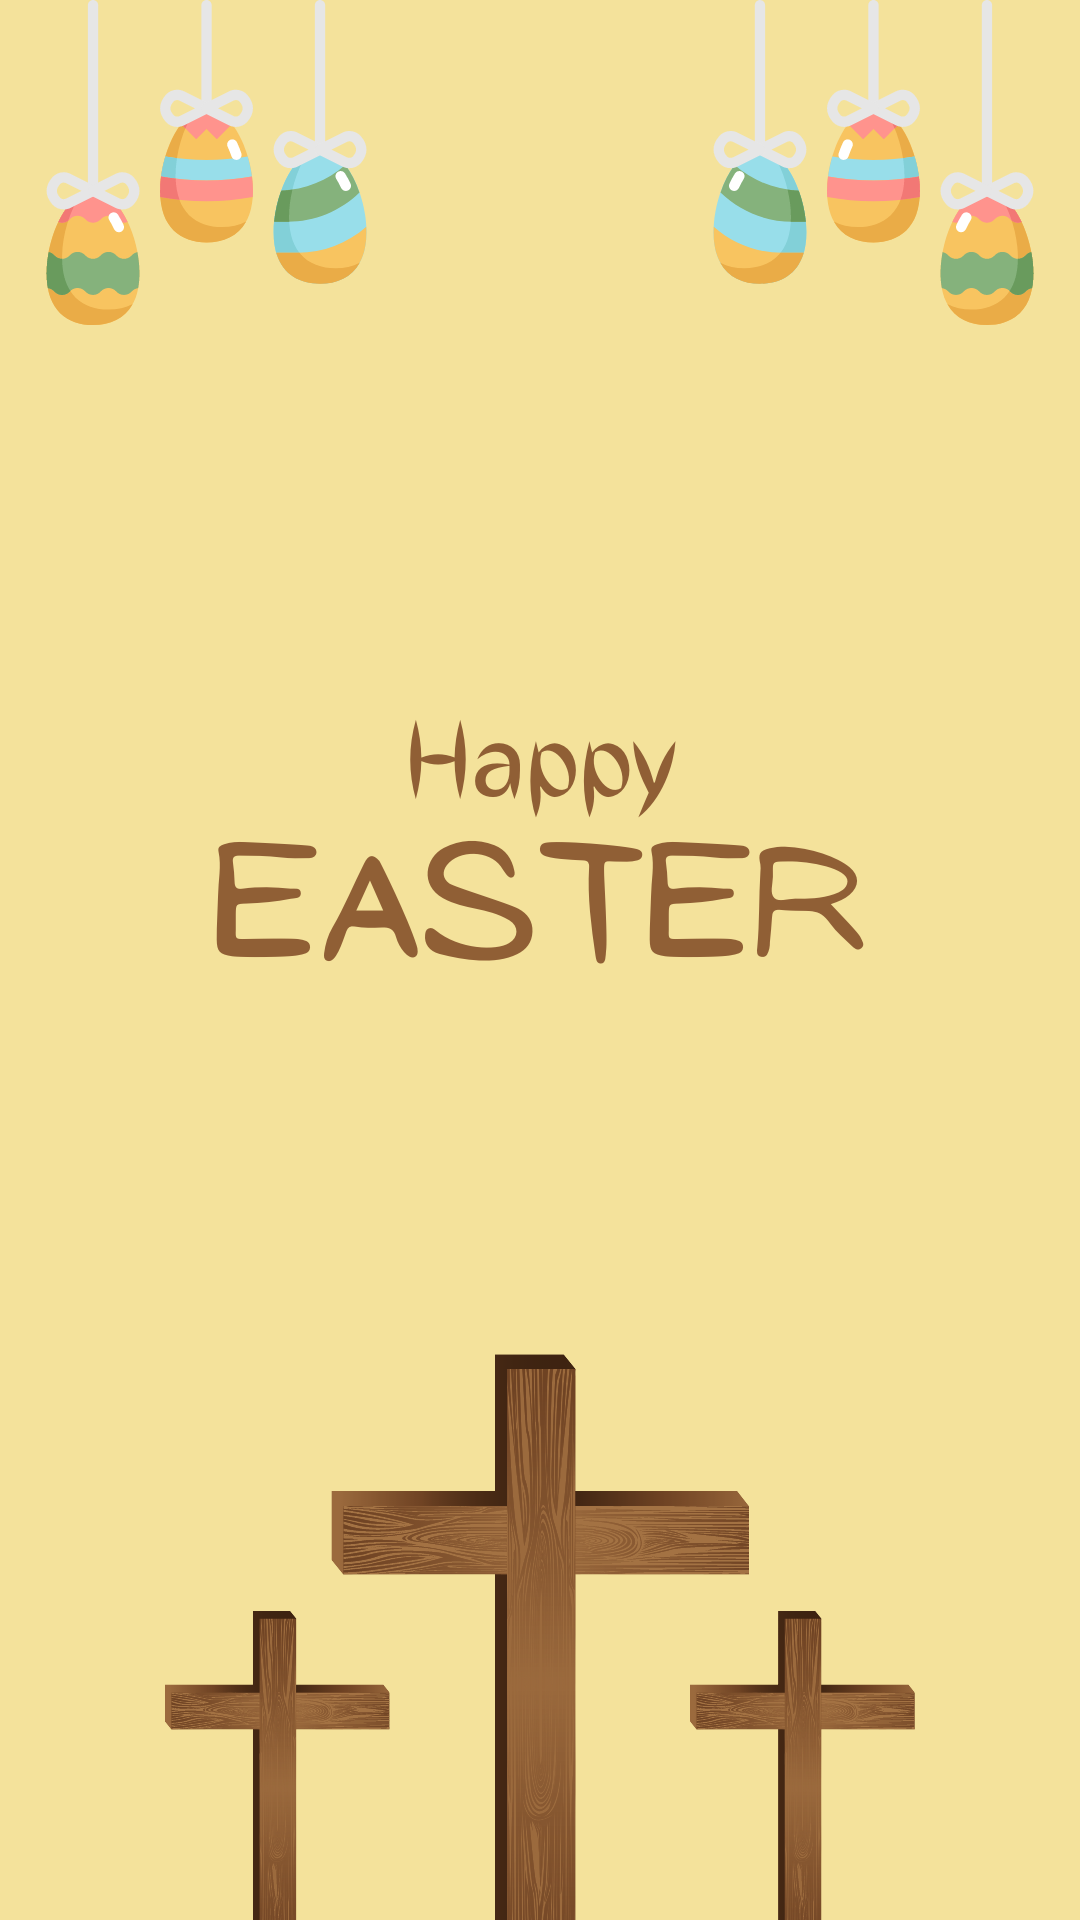 happy easter day